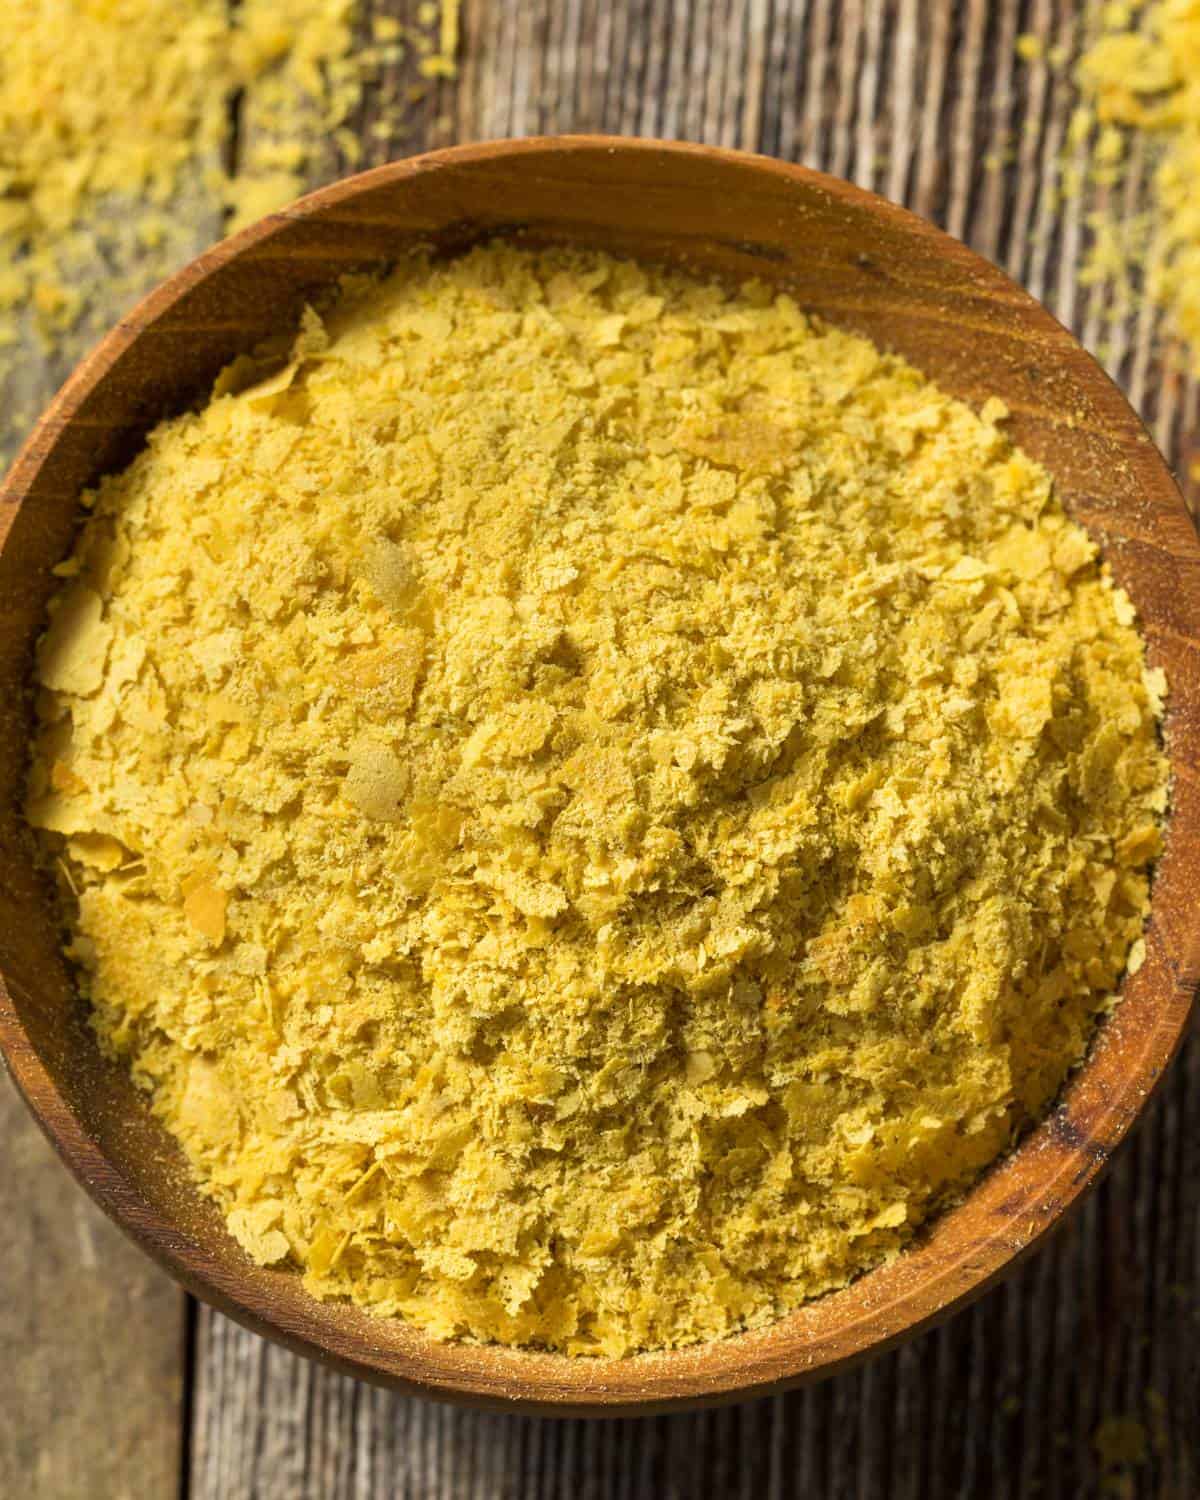 Nutritional yeast in a wooden bowl.